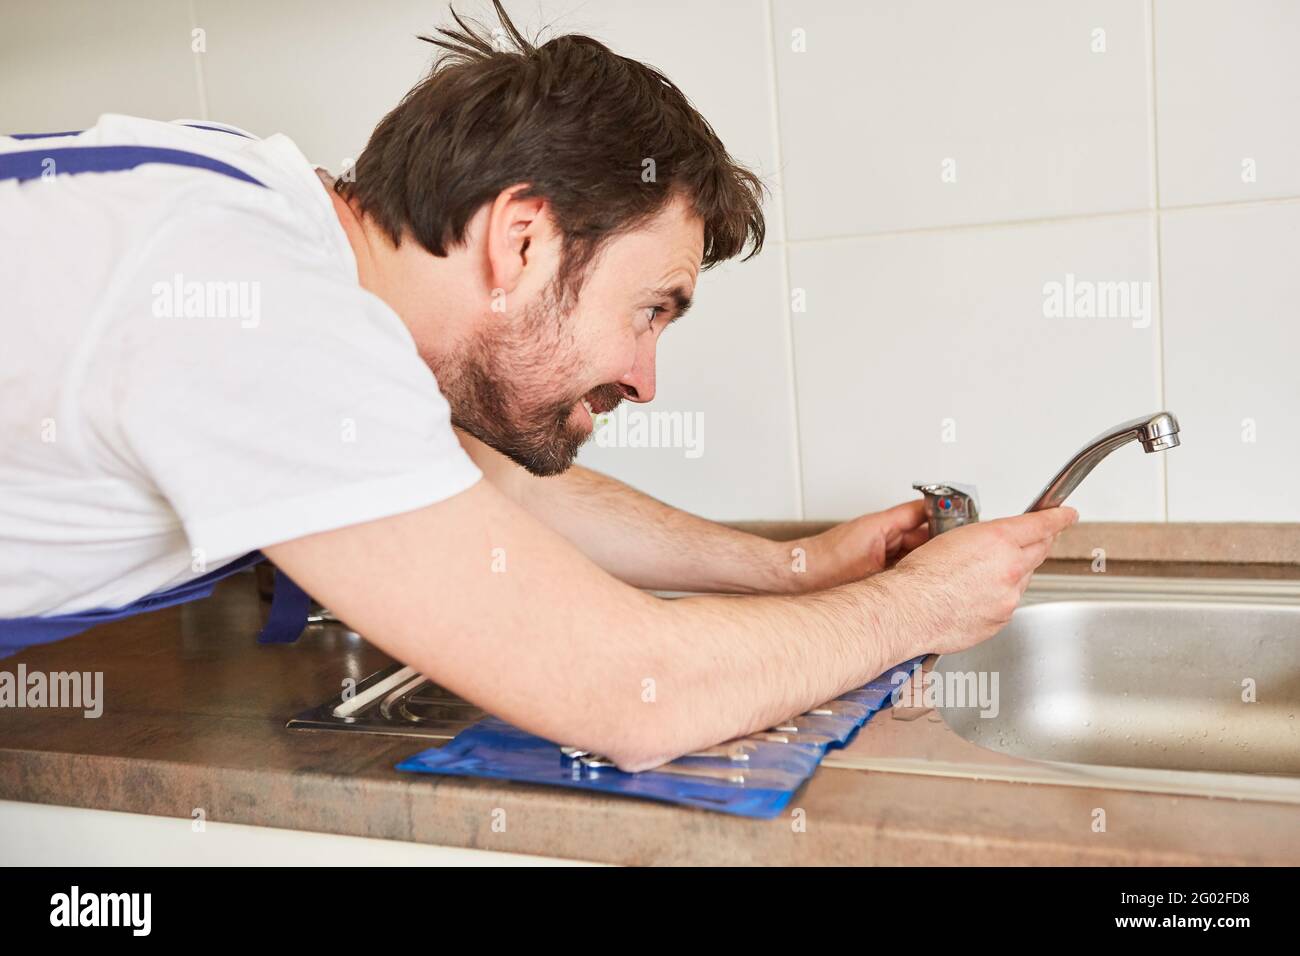 Plumber or handyman plumber repairs faucet on the sink in the kitchen Stock Photo